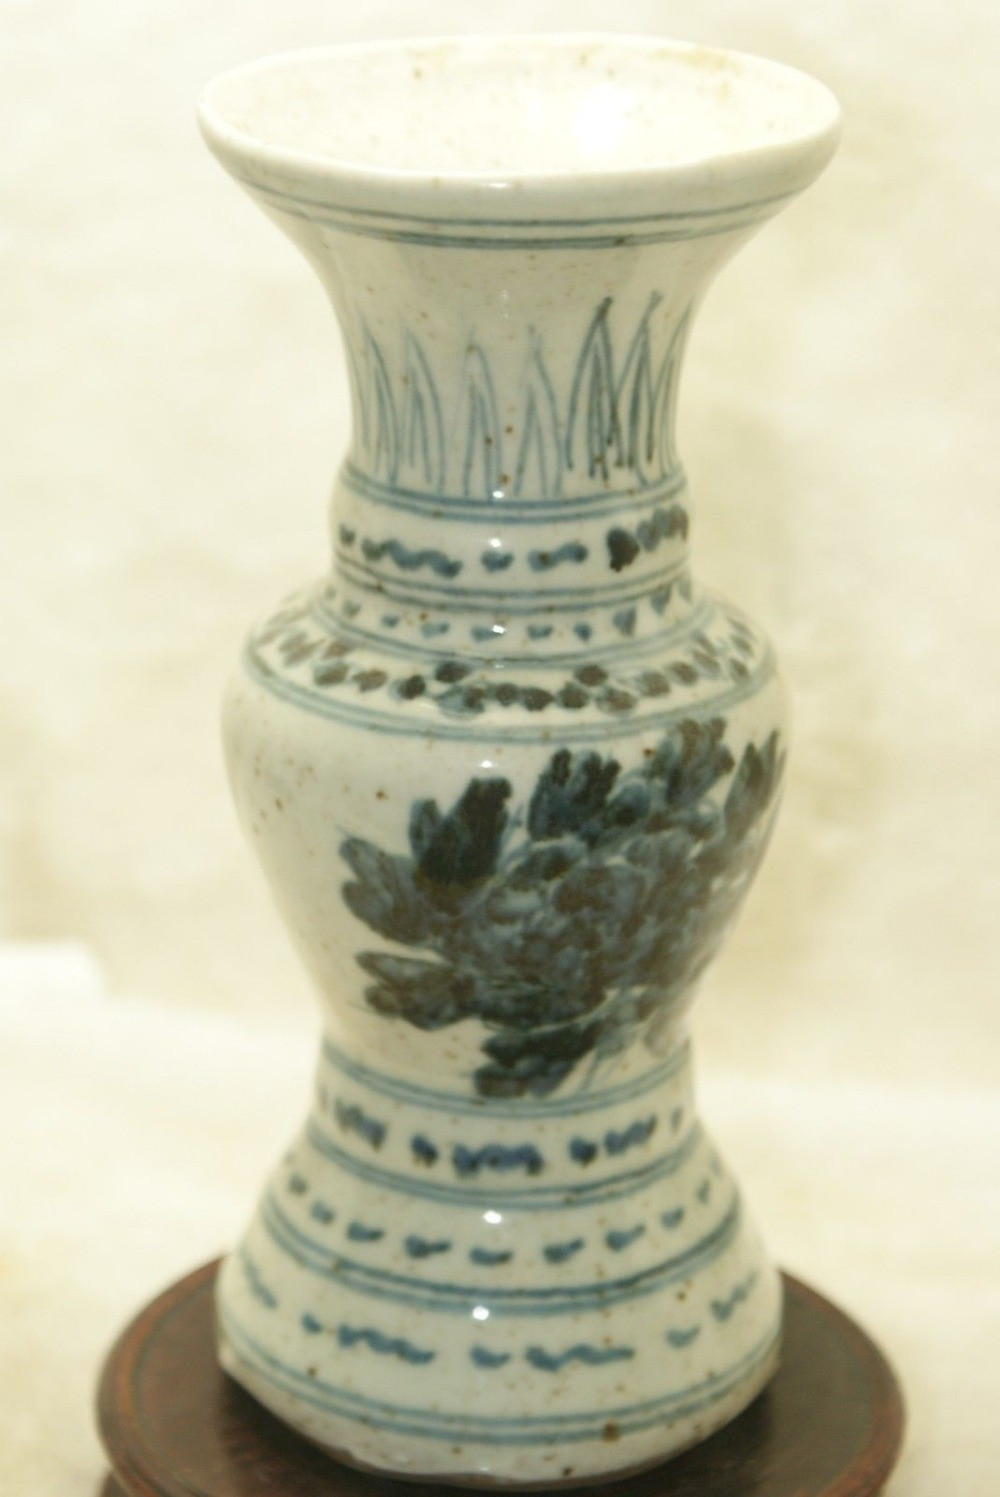 26 Awesome Ming Dynasty Vase for Sale 2024 free download ming dynasty vase for sale of ac297c29afree shipping chinese antique porcelain vases and porcelain vases within free shipping chinese antique porcelain vases and porcelain vases antique porc